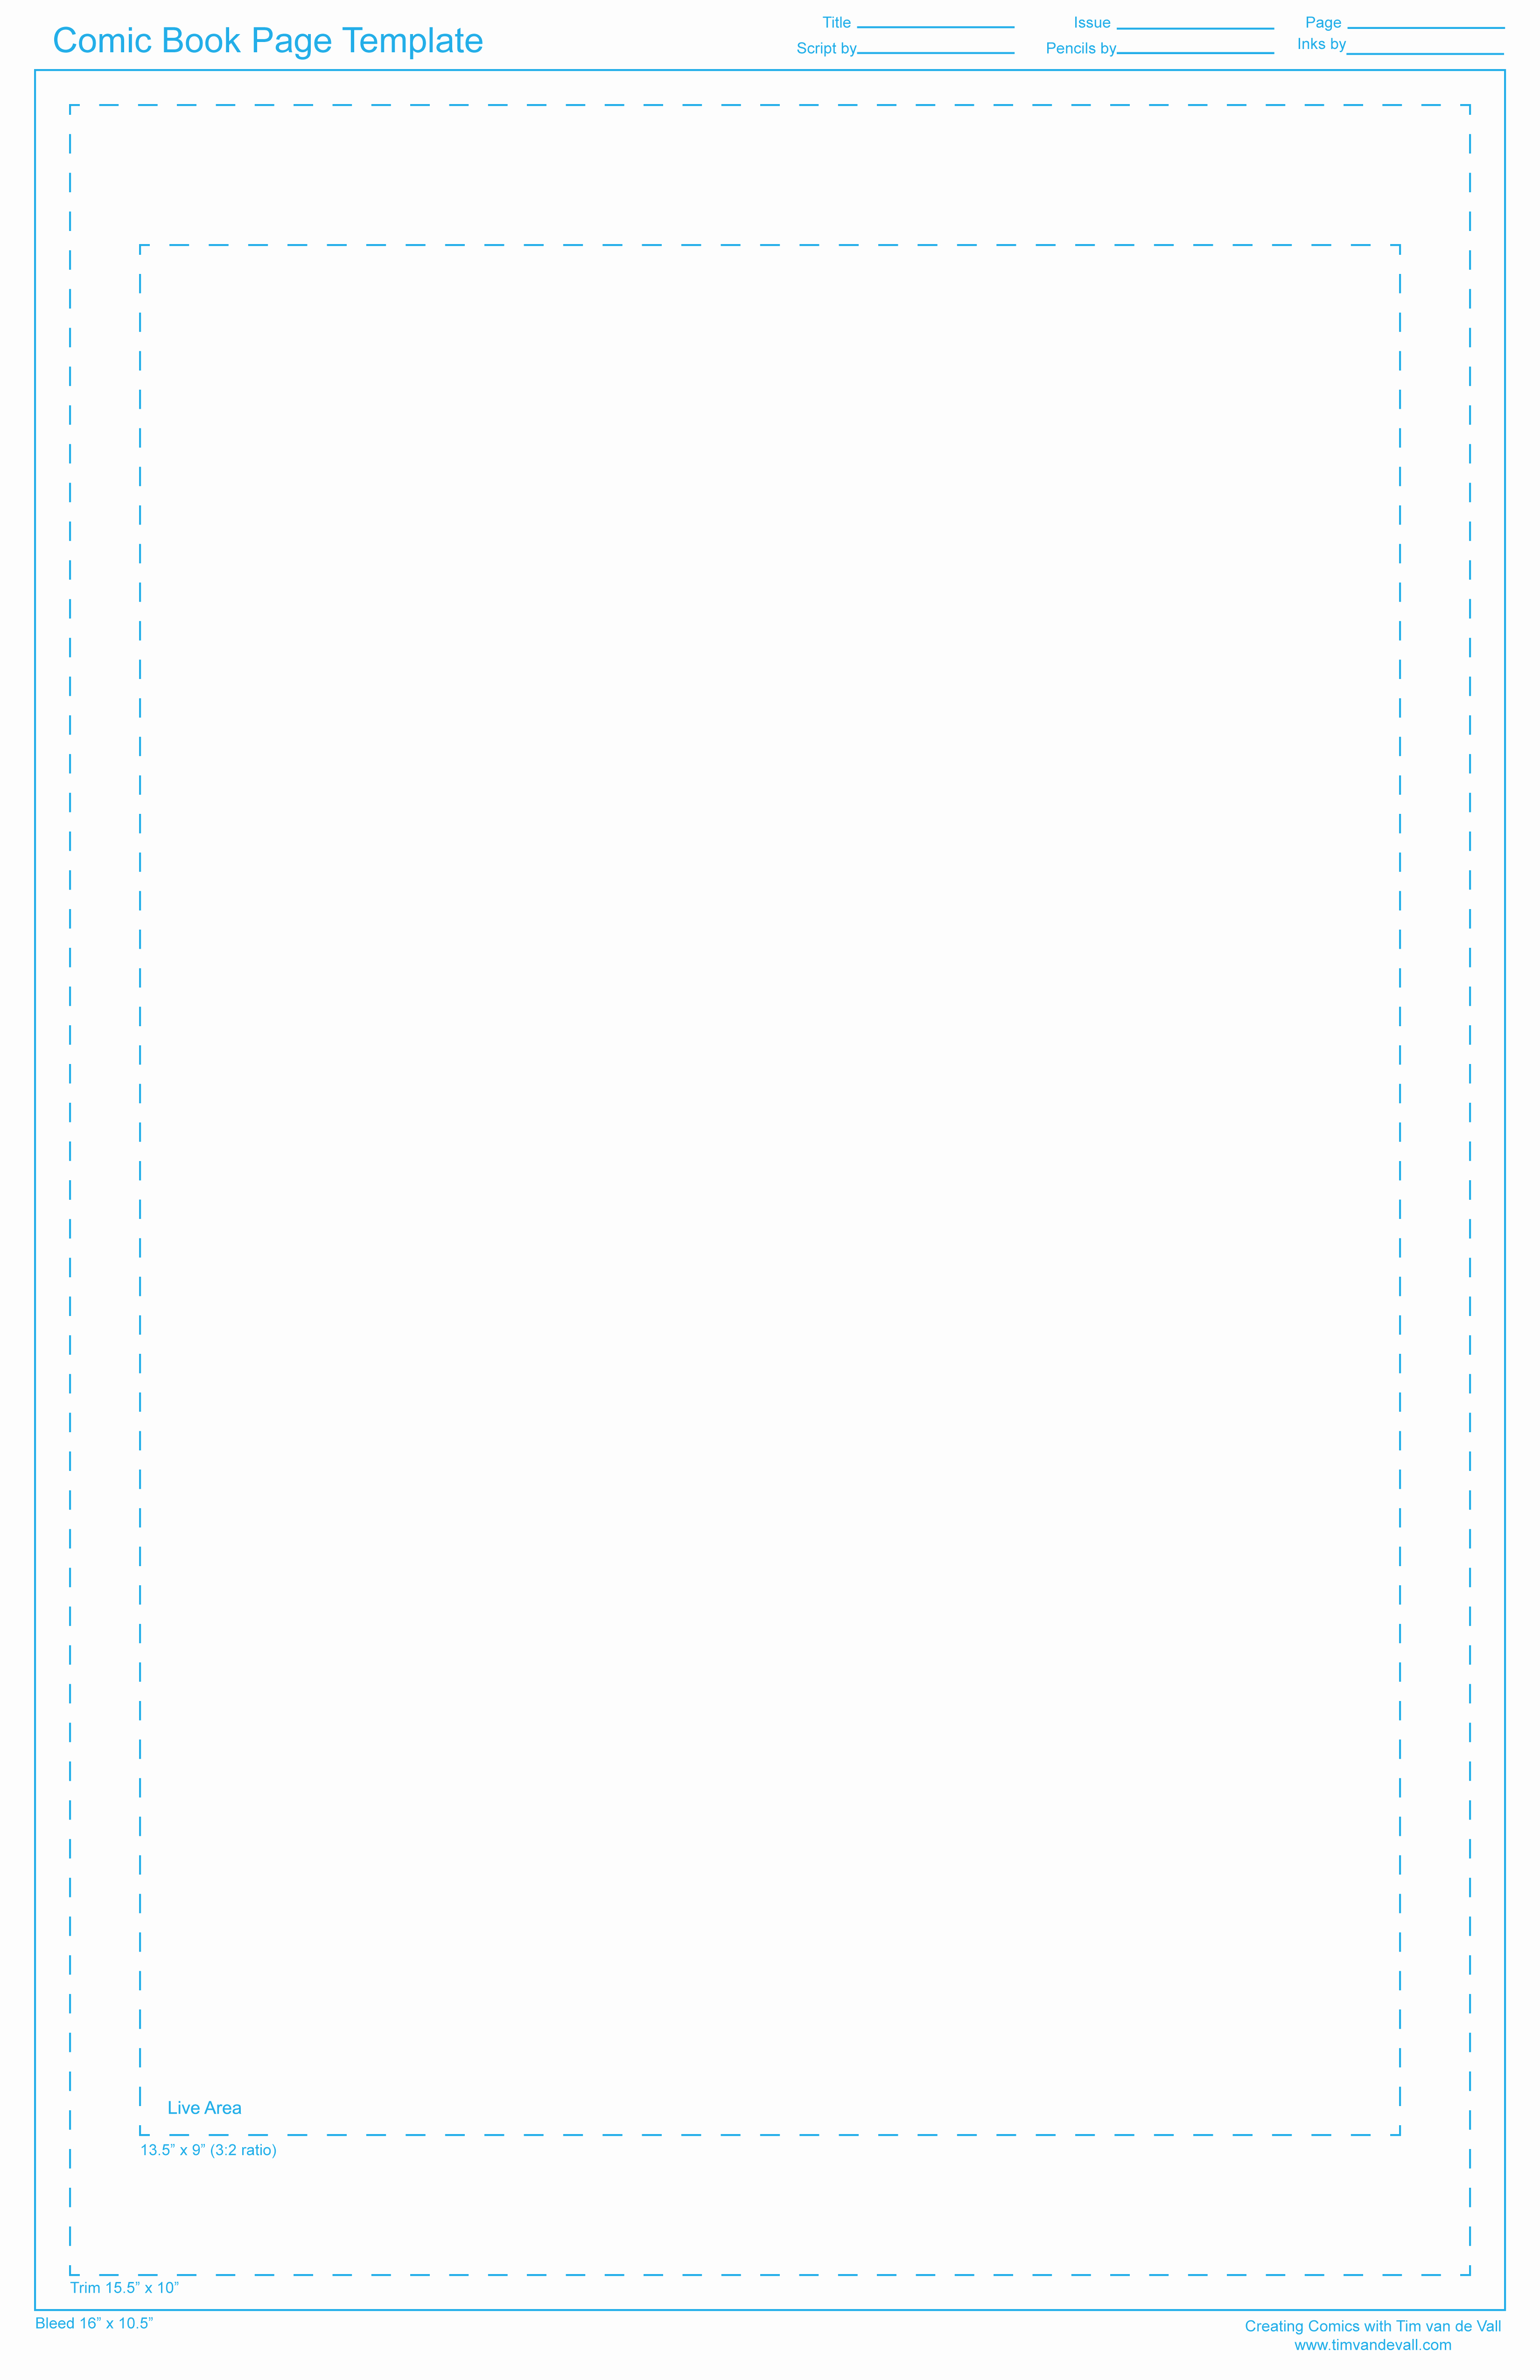 Comic Book Page Template Unique Free Ic Book Page Template Creating Ics with Tim